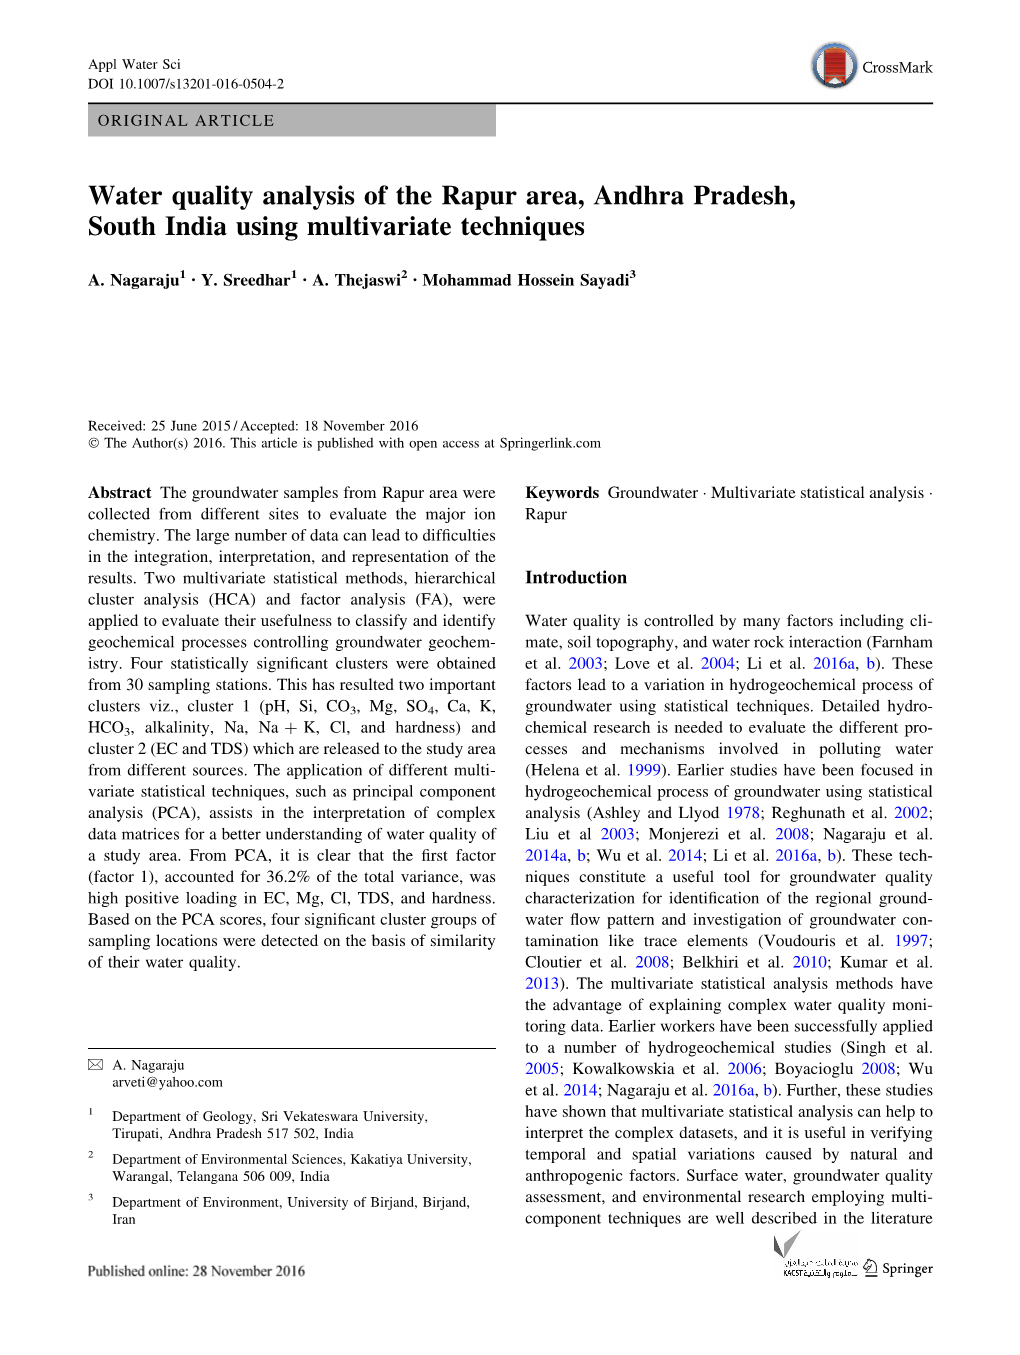 Water Quality Analysis of the Rapur Area, Andhra Pradesh, South India Using Multivariate Techniques